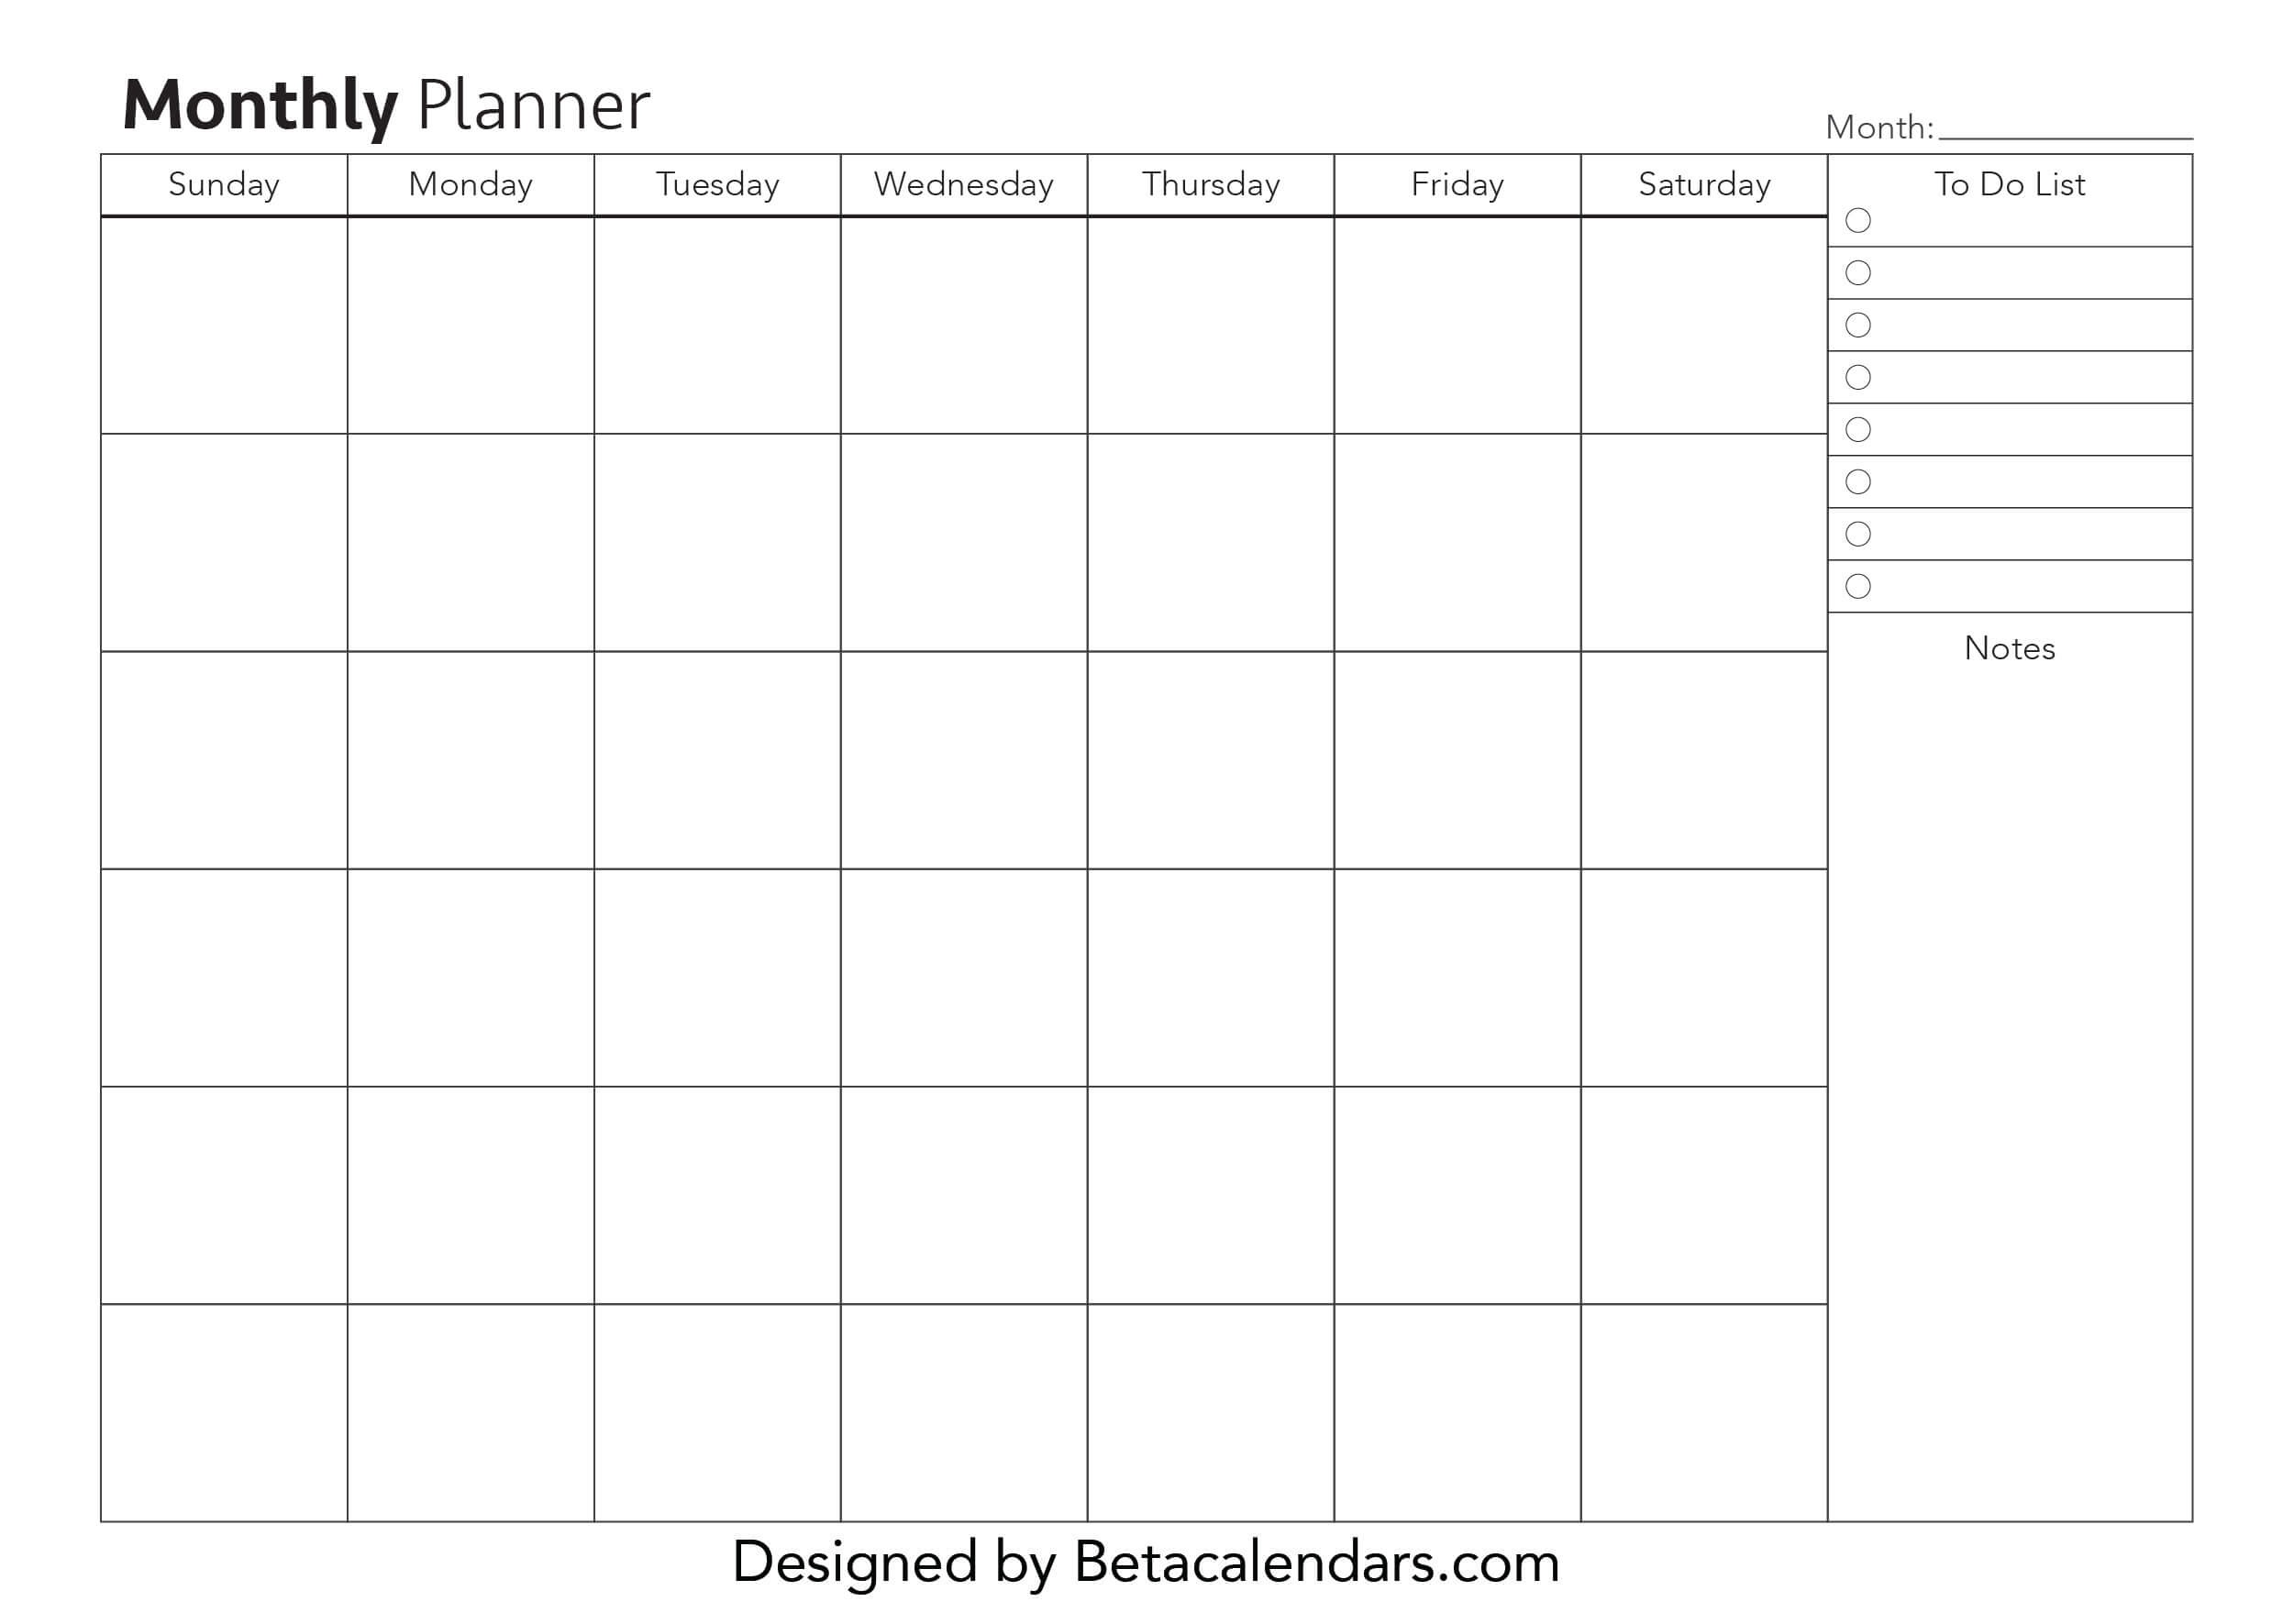 free-monthly-planner-template-free-printable-templates